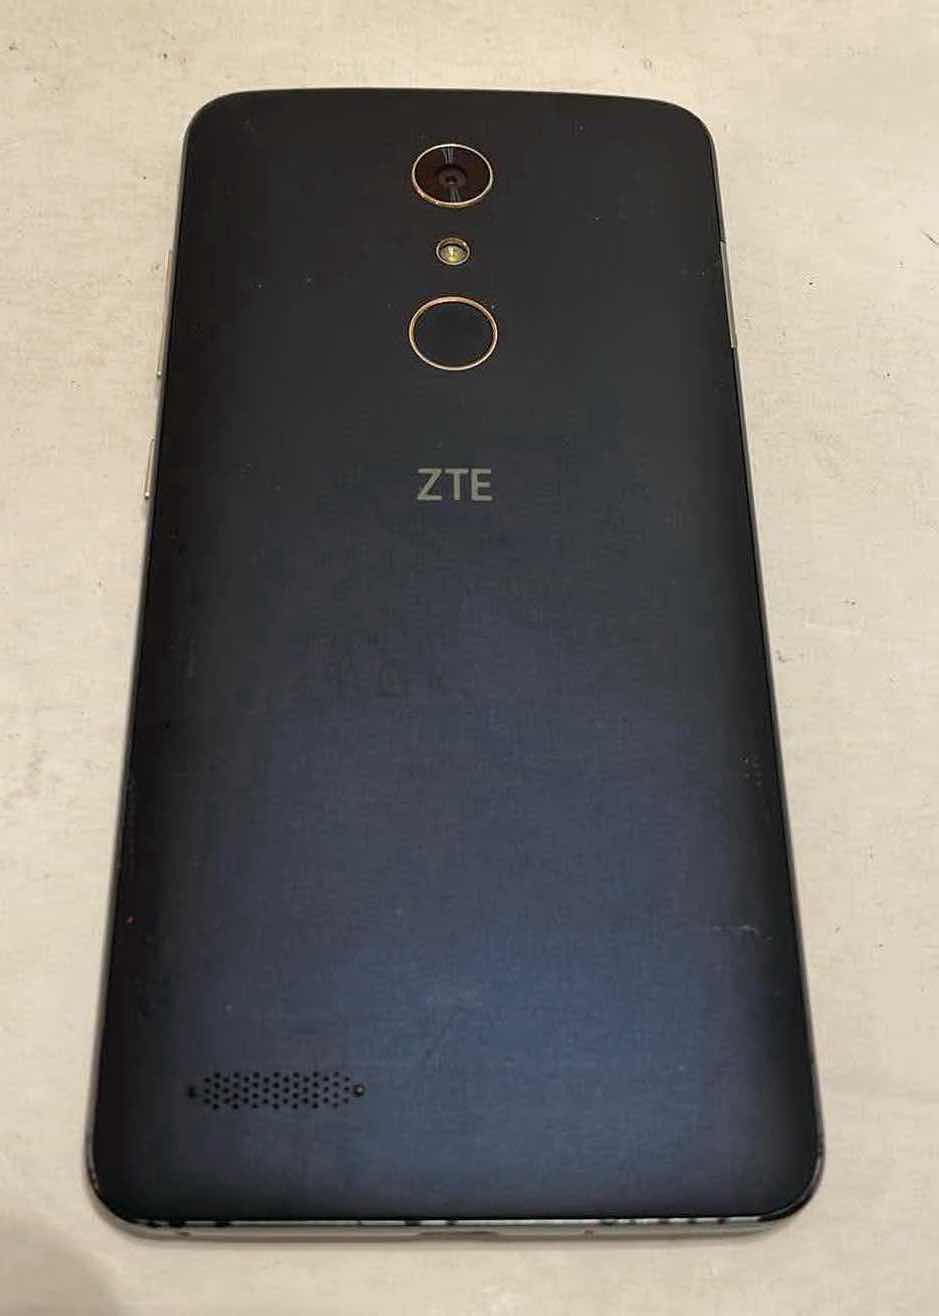 Photo 3 of ZTE TOUCH SCREEN CELL PHONE 64 G